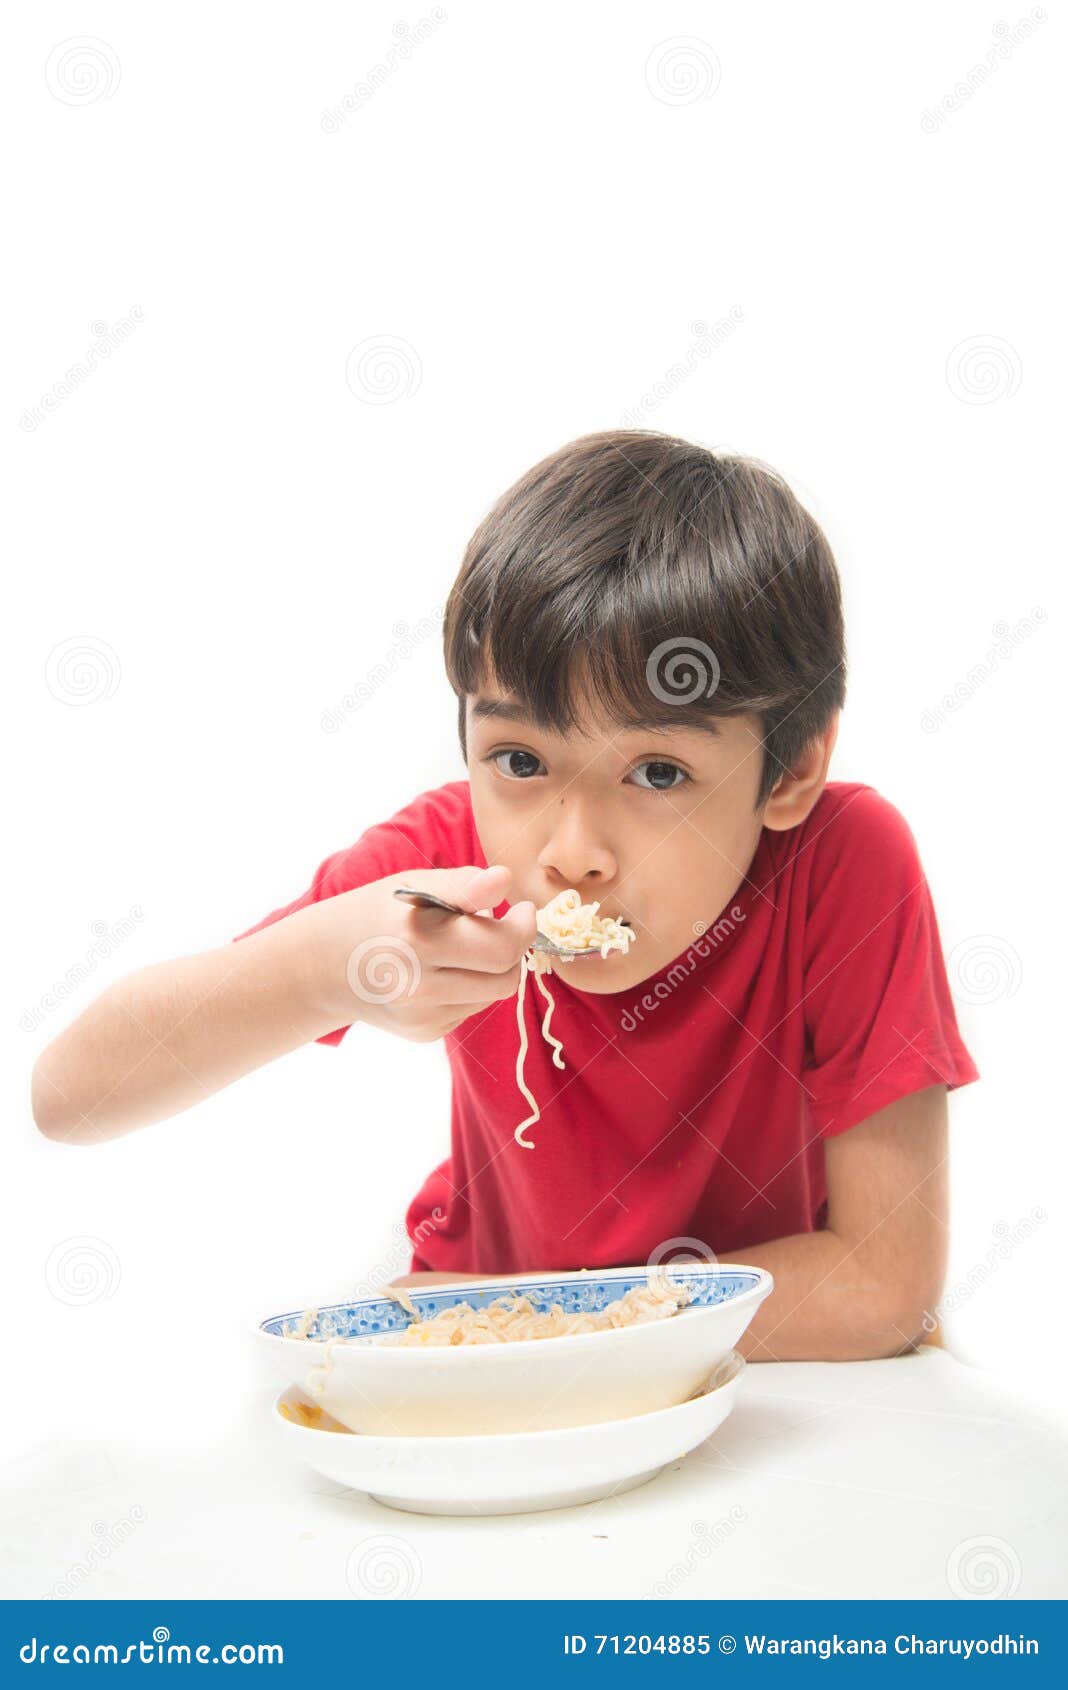 Little Boy Eating Instant Noodle on White Background Stock Image ...